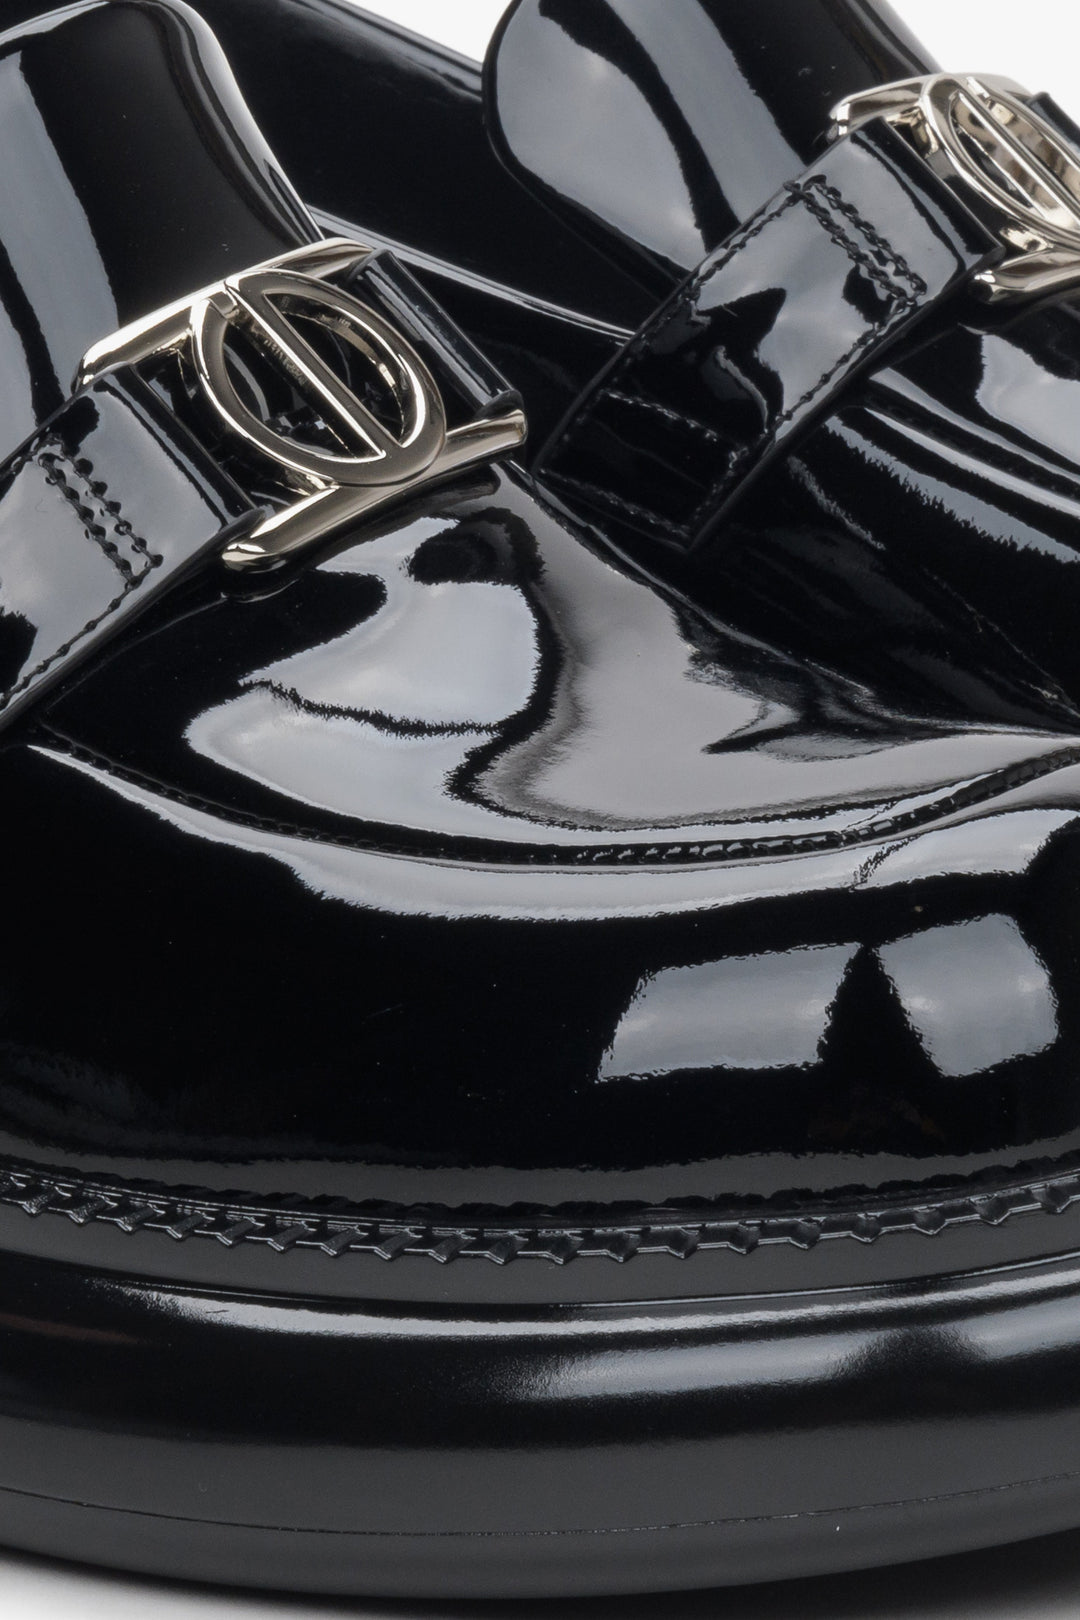 Patent leather black loafers - a close-up on details.